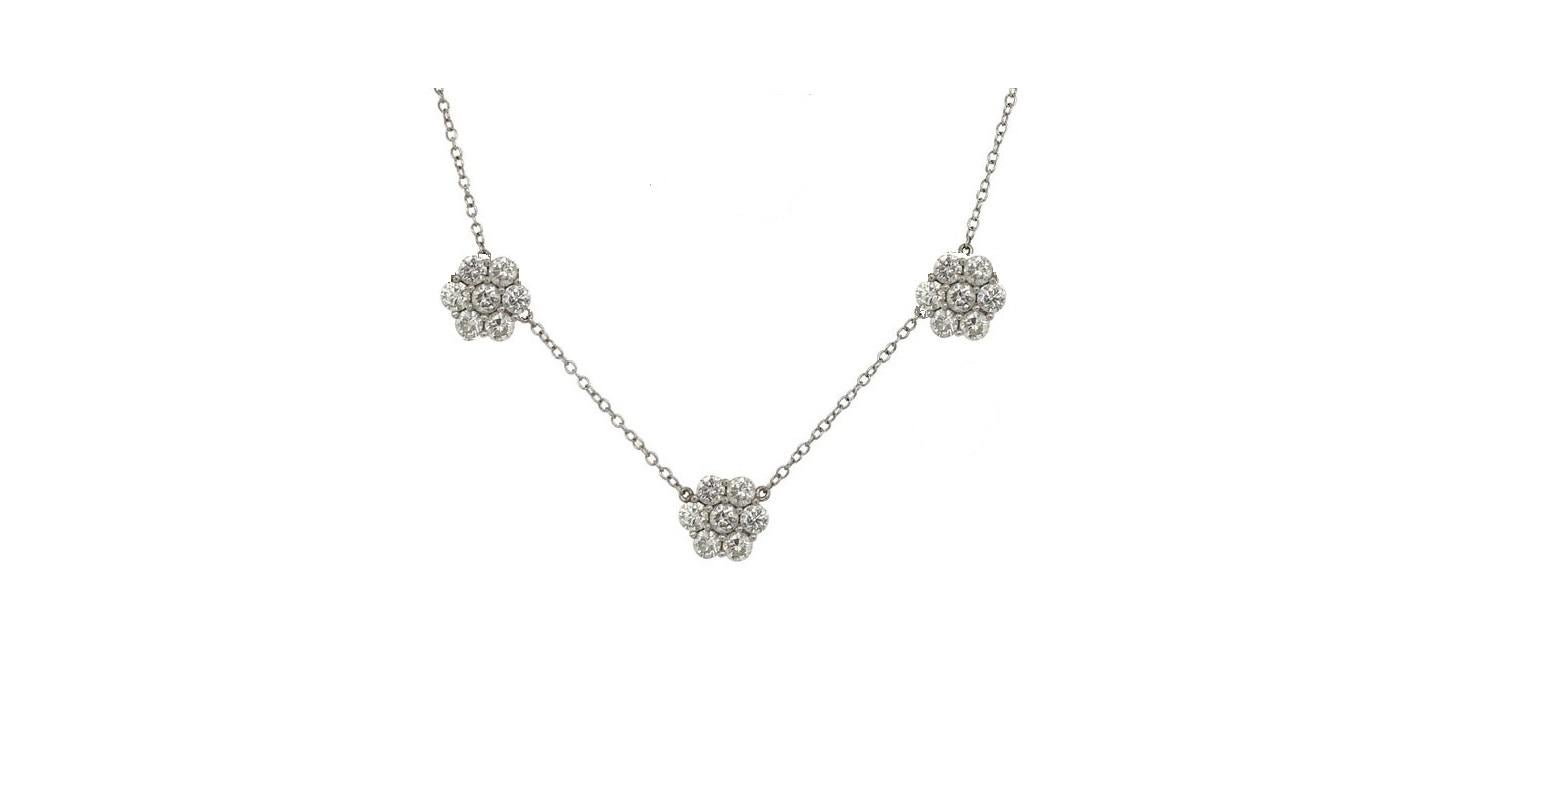 Three cluster necklace featuring 21 round brilliants weighing 4.02 carats in 18k white gold. 

Can be made in any size, gold color or gemstone. Build your own!